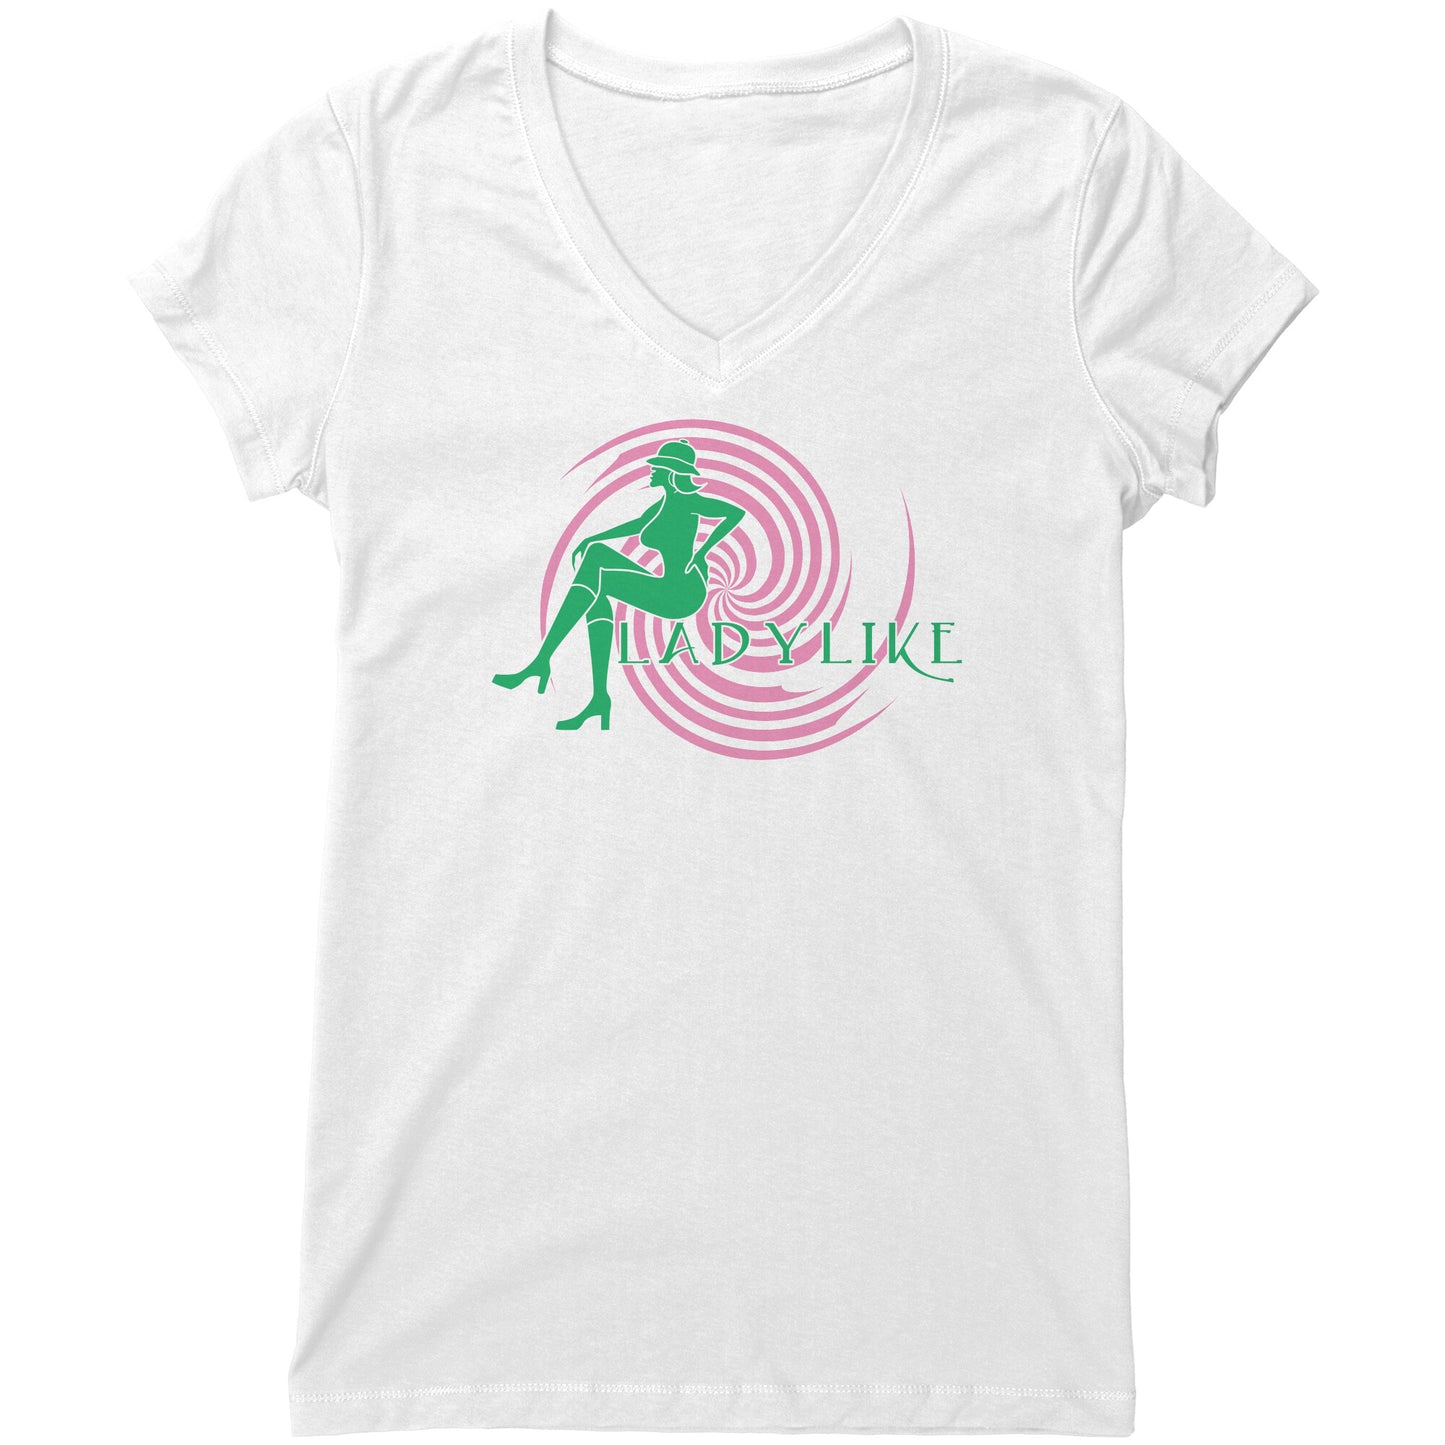 Ladylike Women's V-Neck T-shirt-Pink and Green